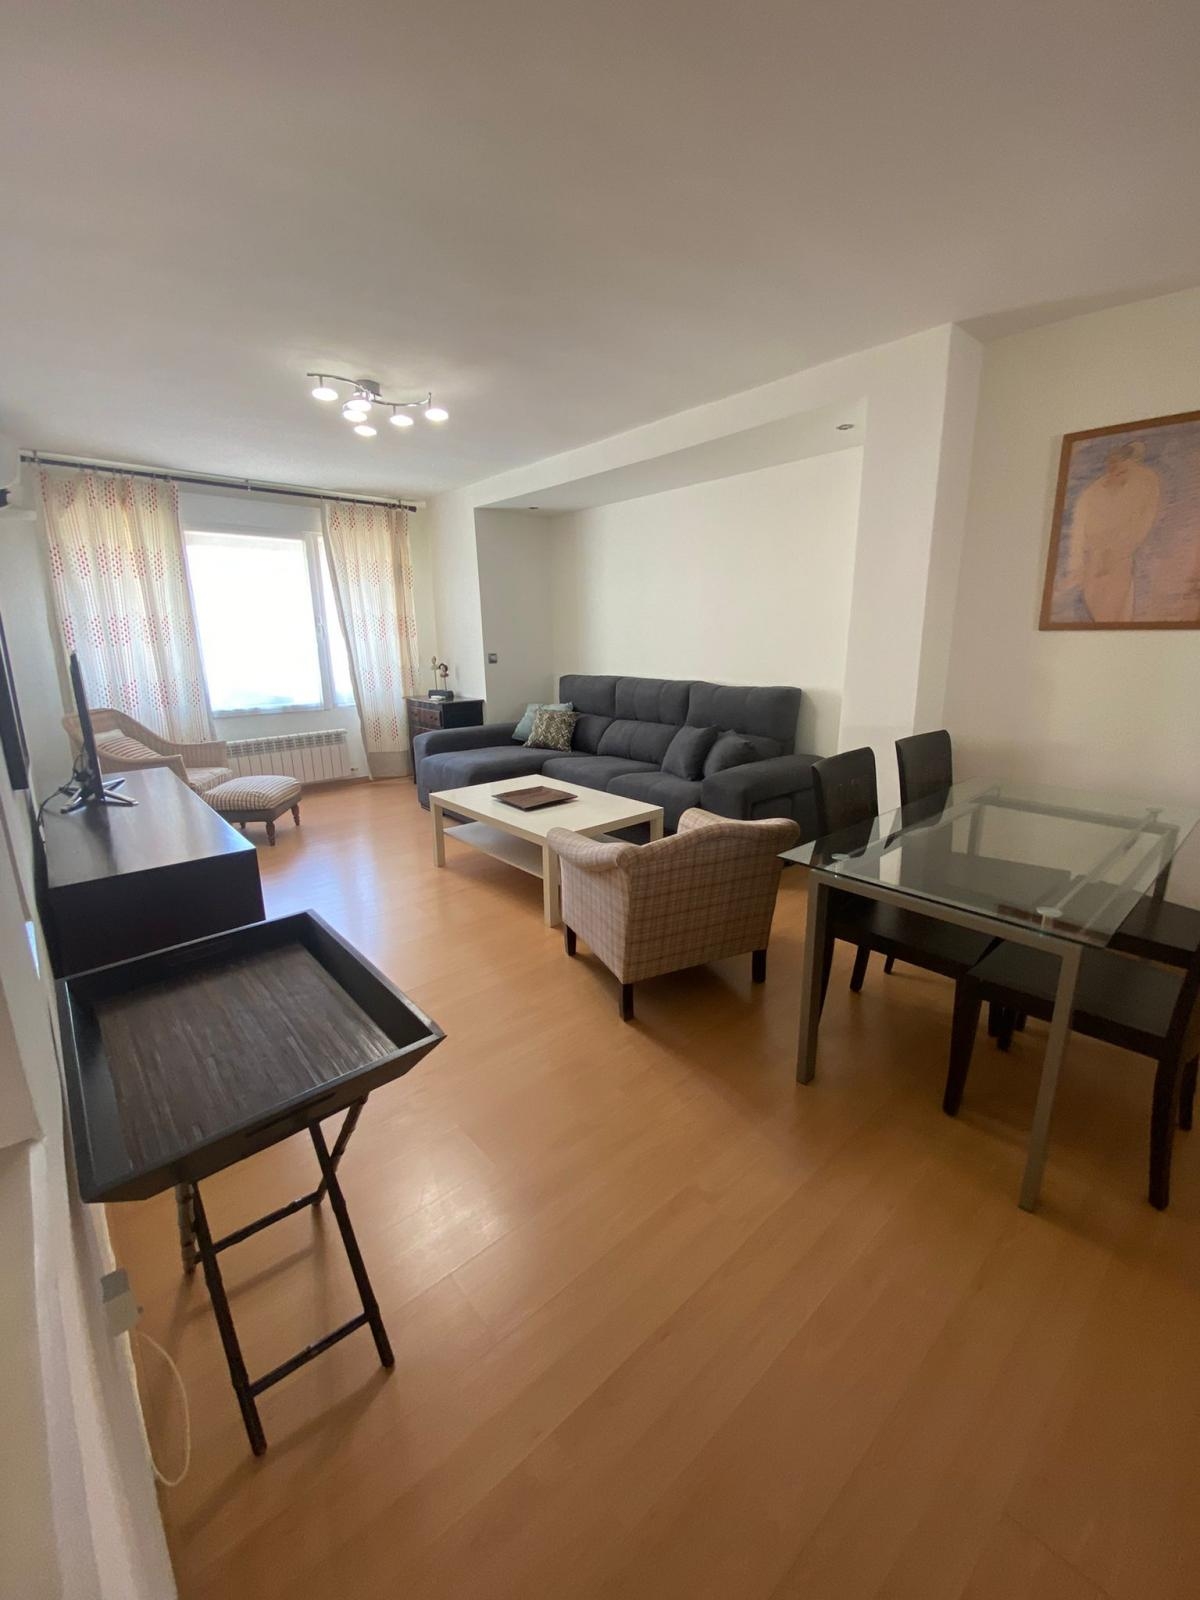 Flat for rent in San Antón , Granada